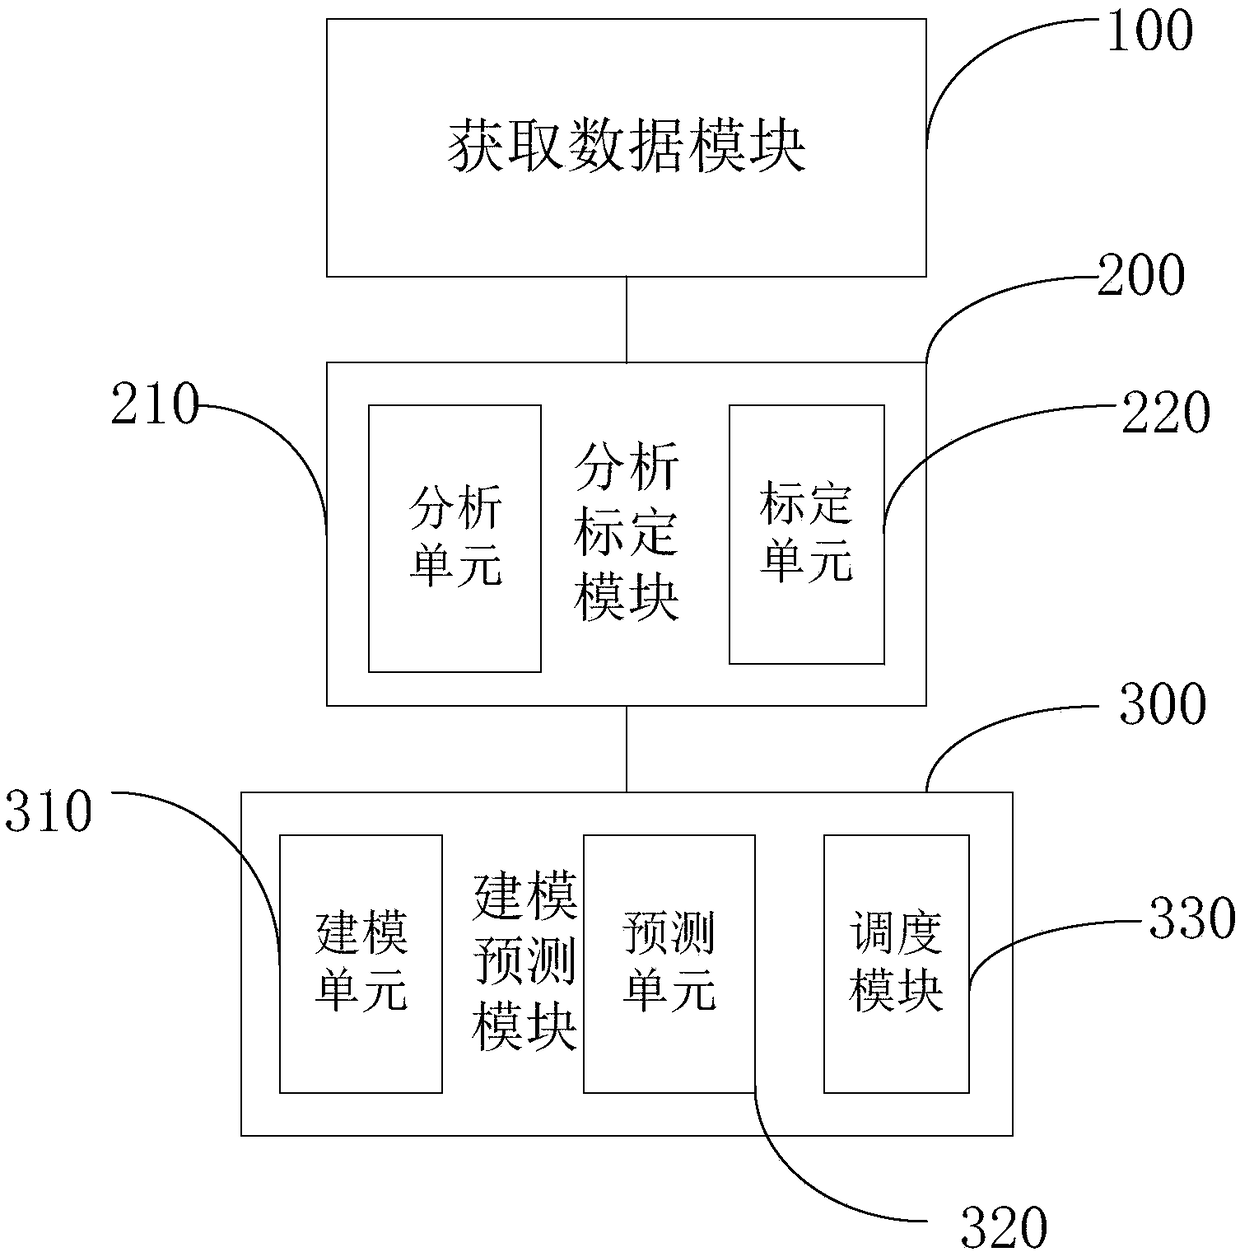 Freight transport planning and management method and system based on intelligent traffic light OD information examination